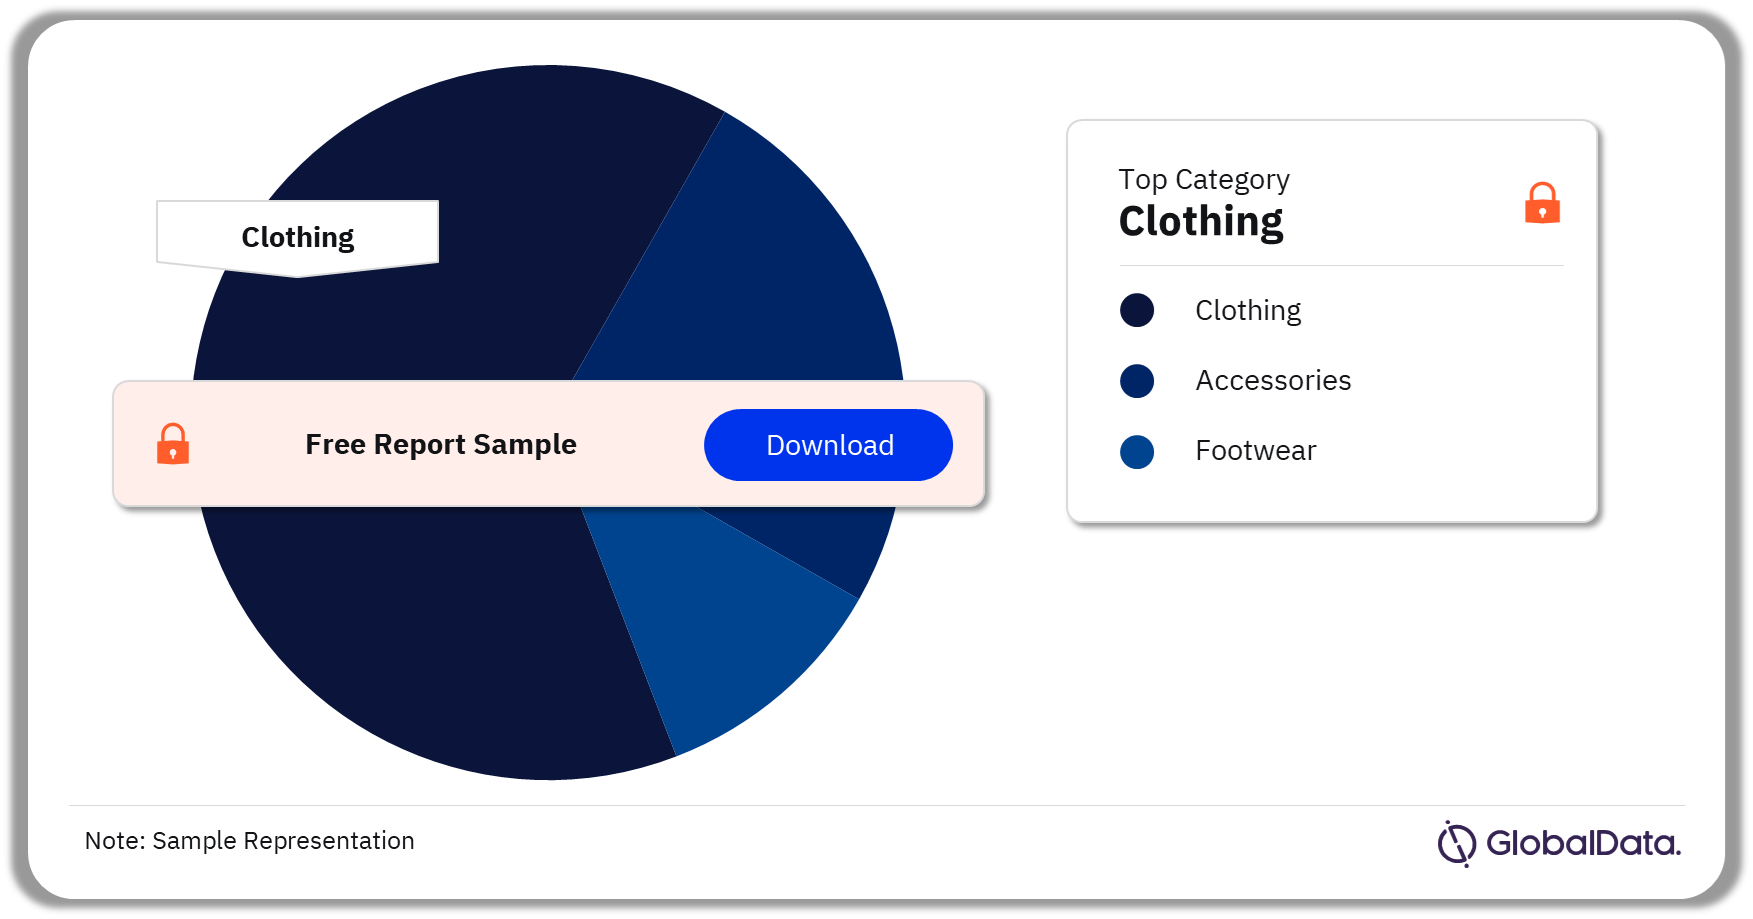 Spain Apparel Market Analysis by Categories, 2022 (%)